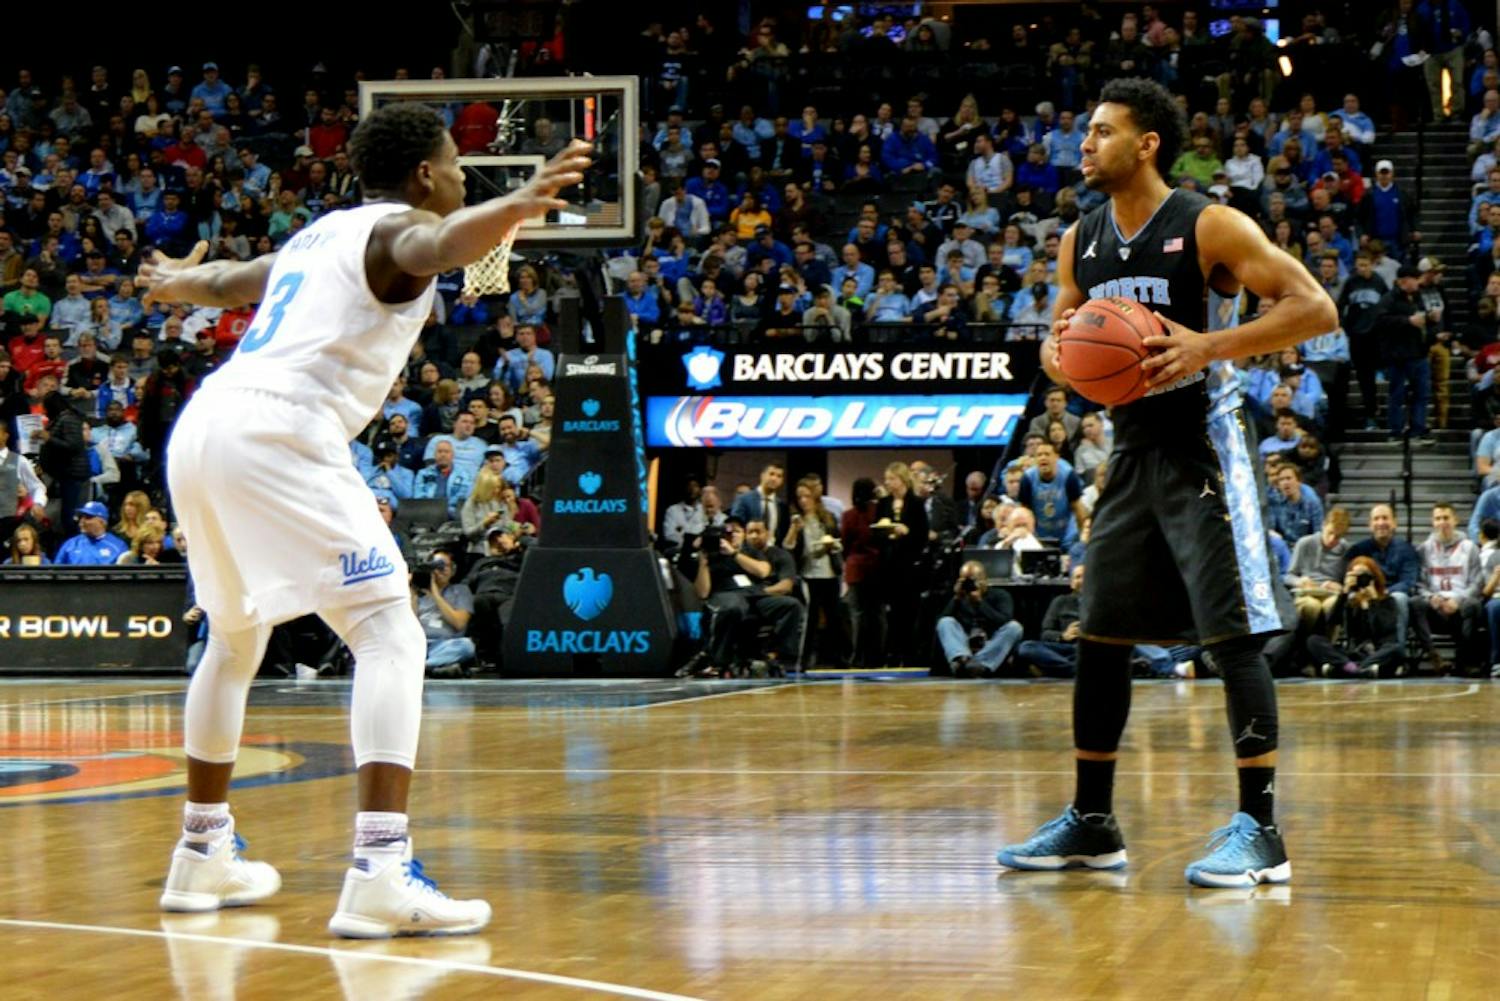 Sophomore guard&nbsp;Joel Berry had a career-high 17 points in UNC's 89-76 win over UCLA.&nbsp;